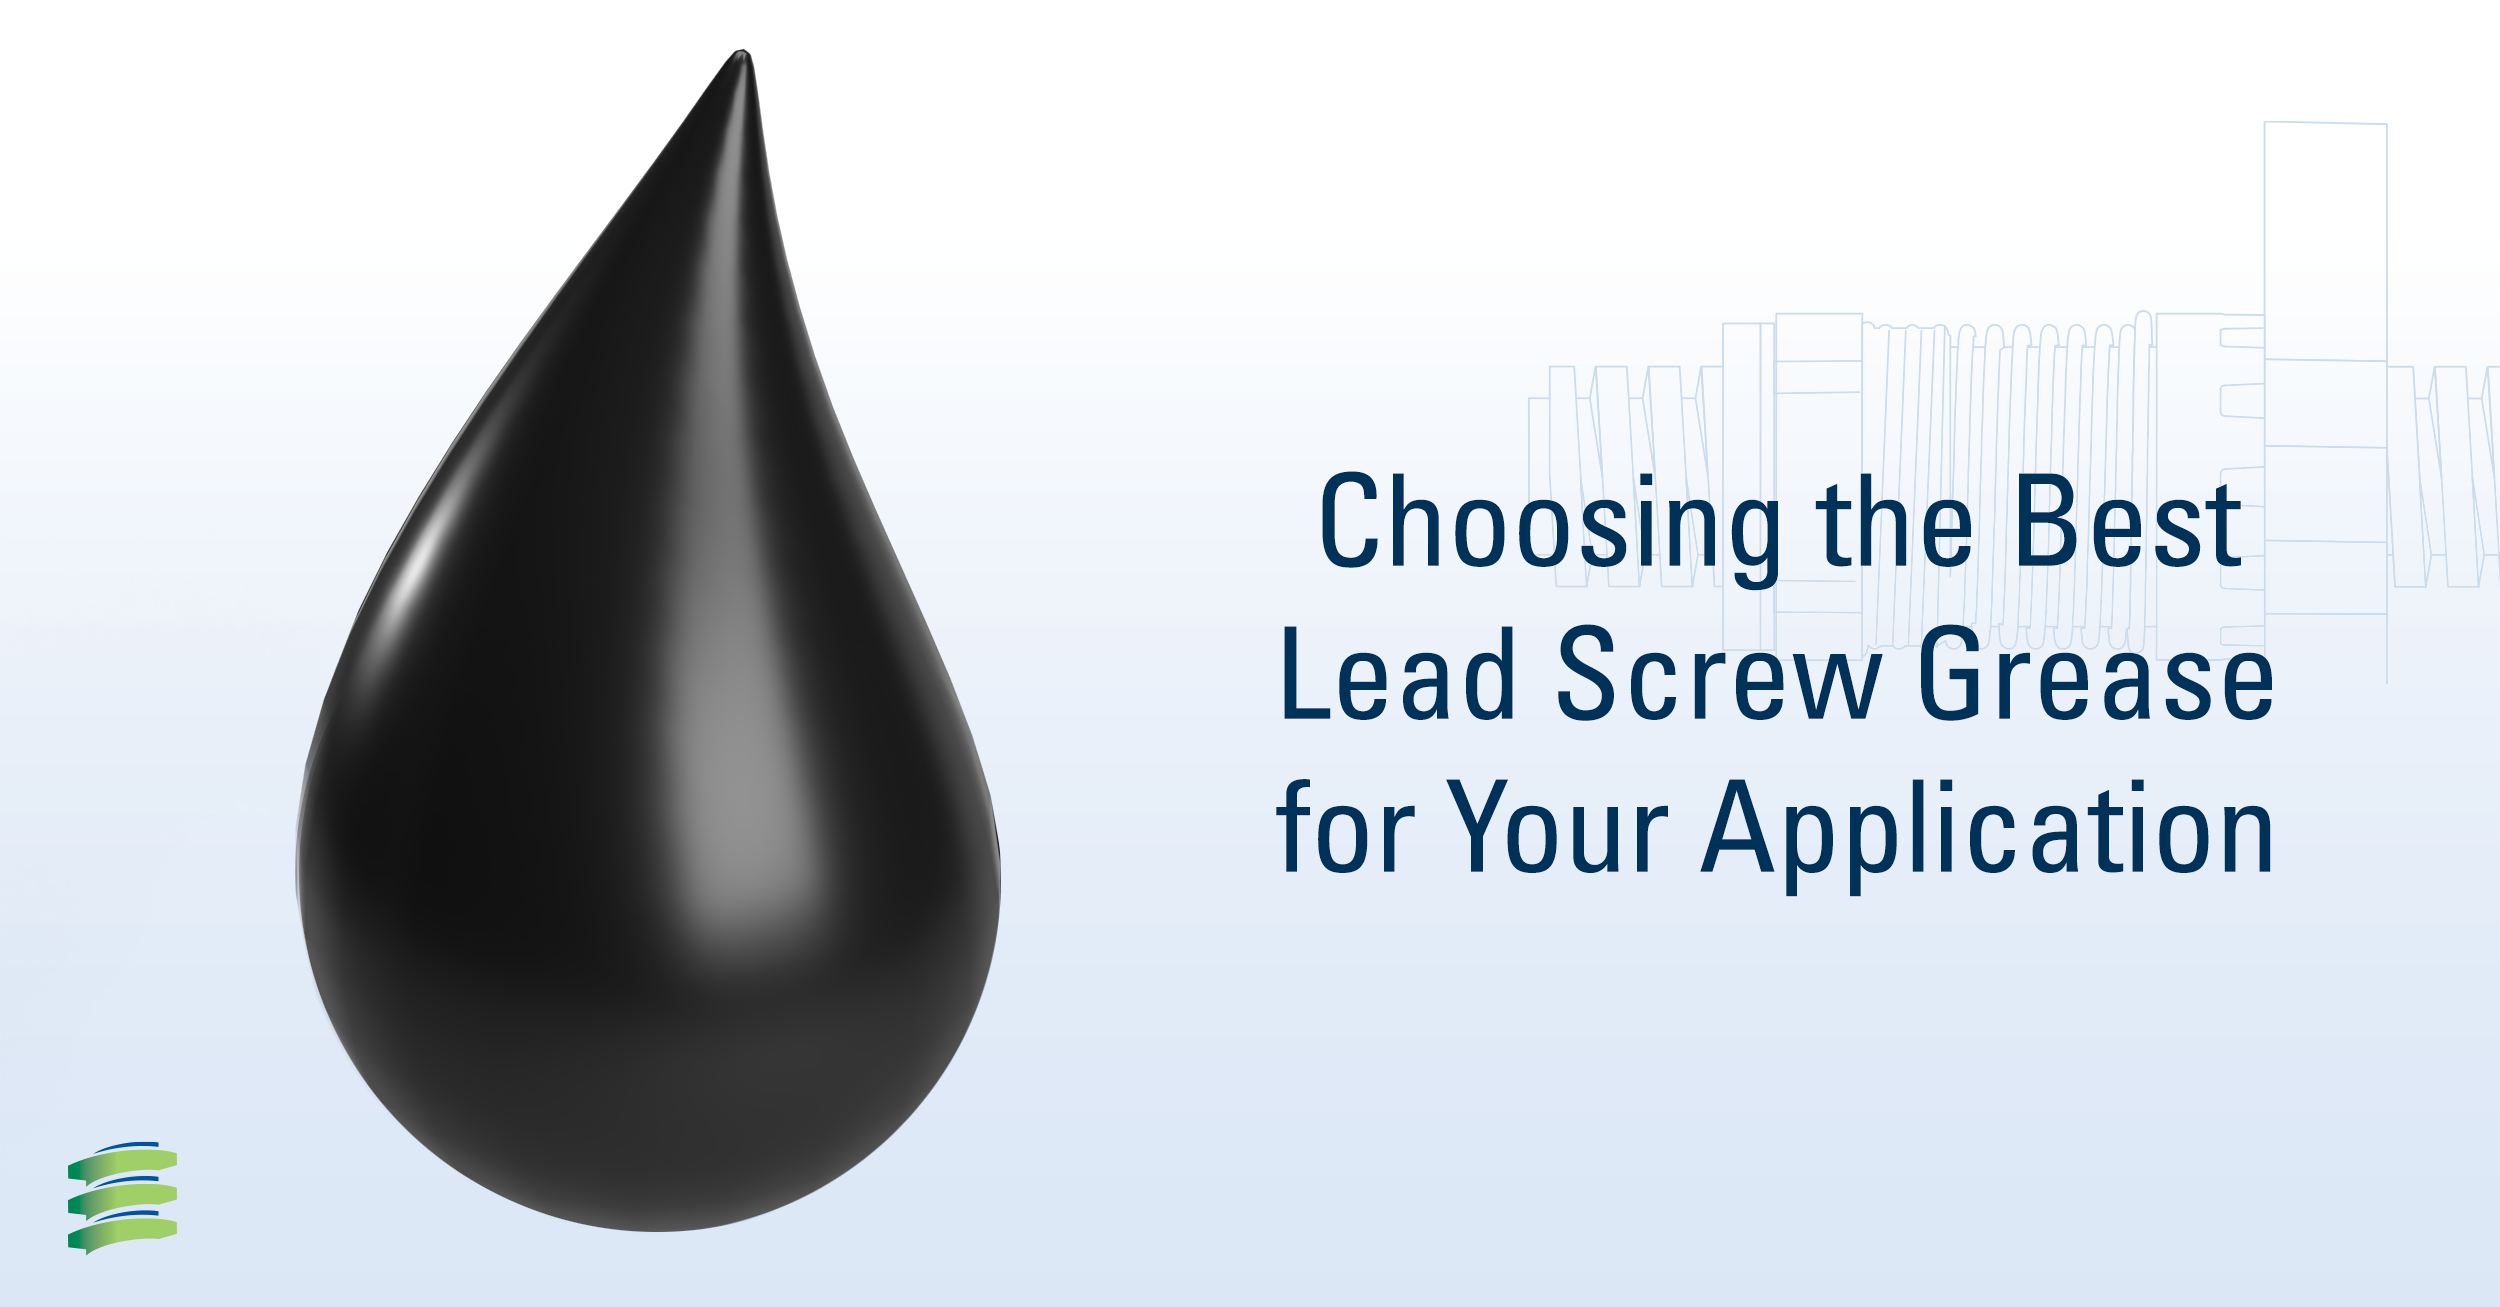 Choosing the Best Lead Screw Grease for your Application